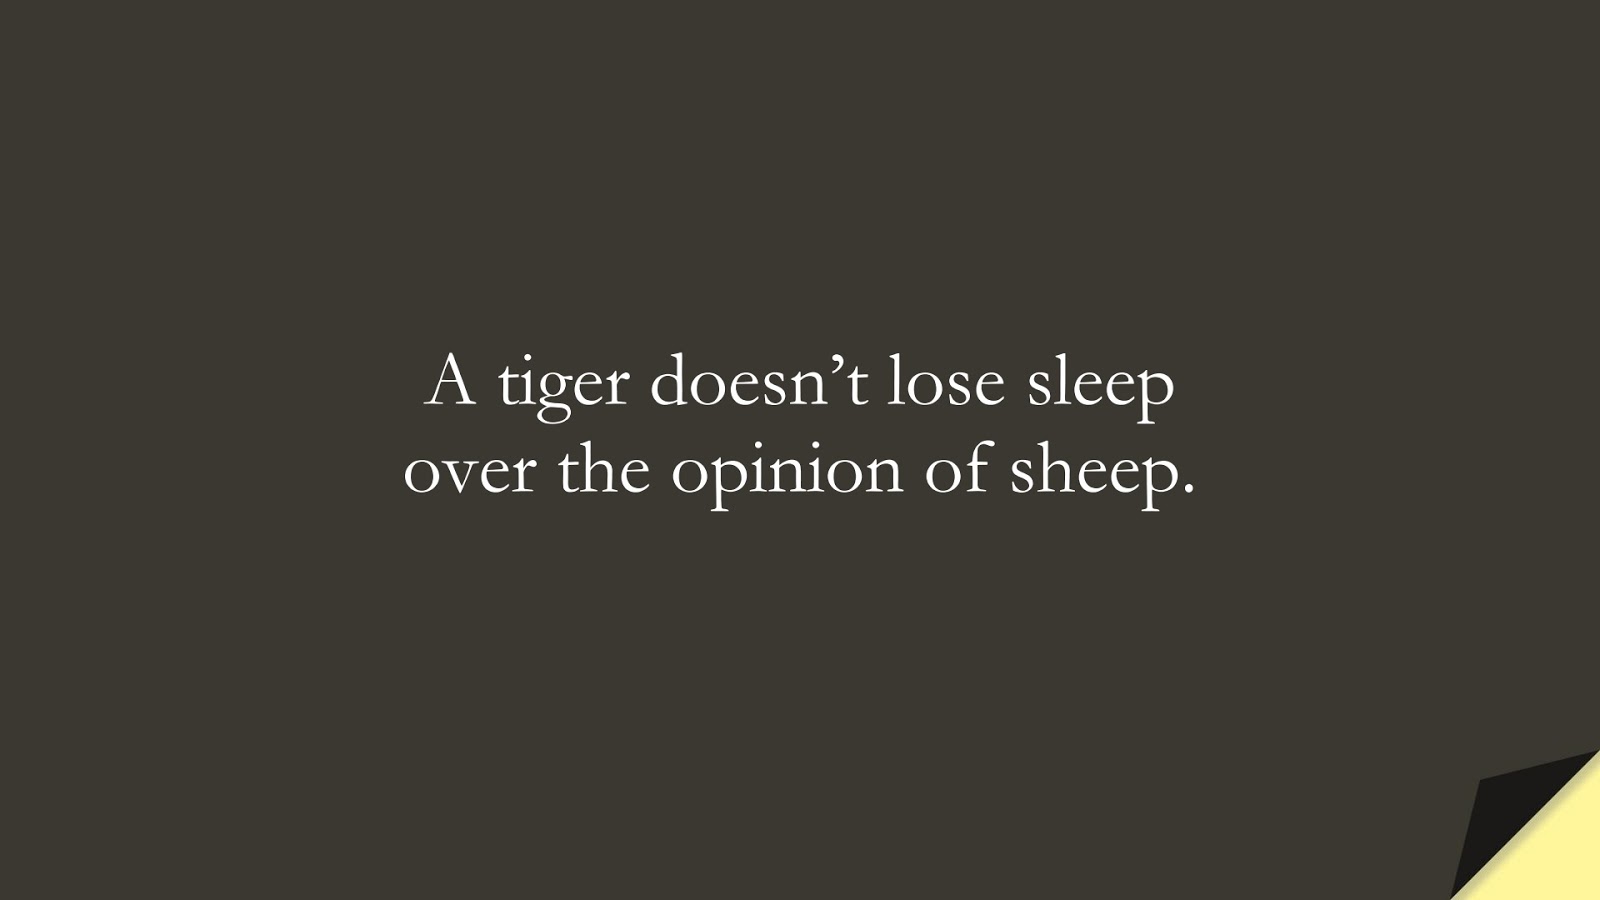 A tiger doesn’t lose sleep over the opinion of sheep.FALSE